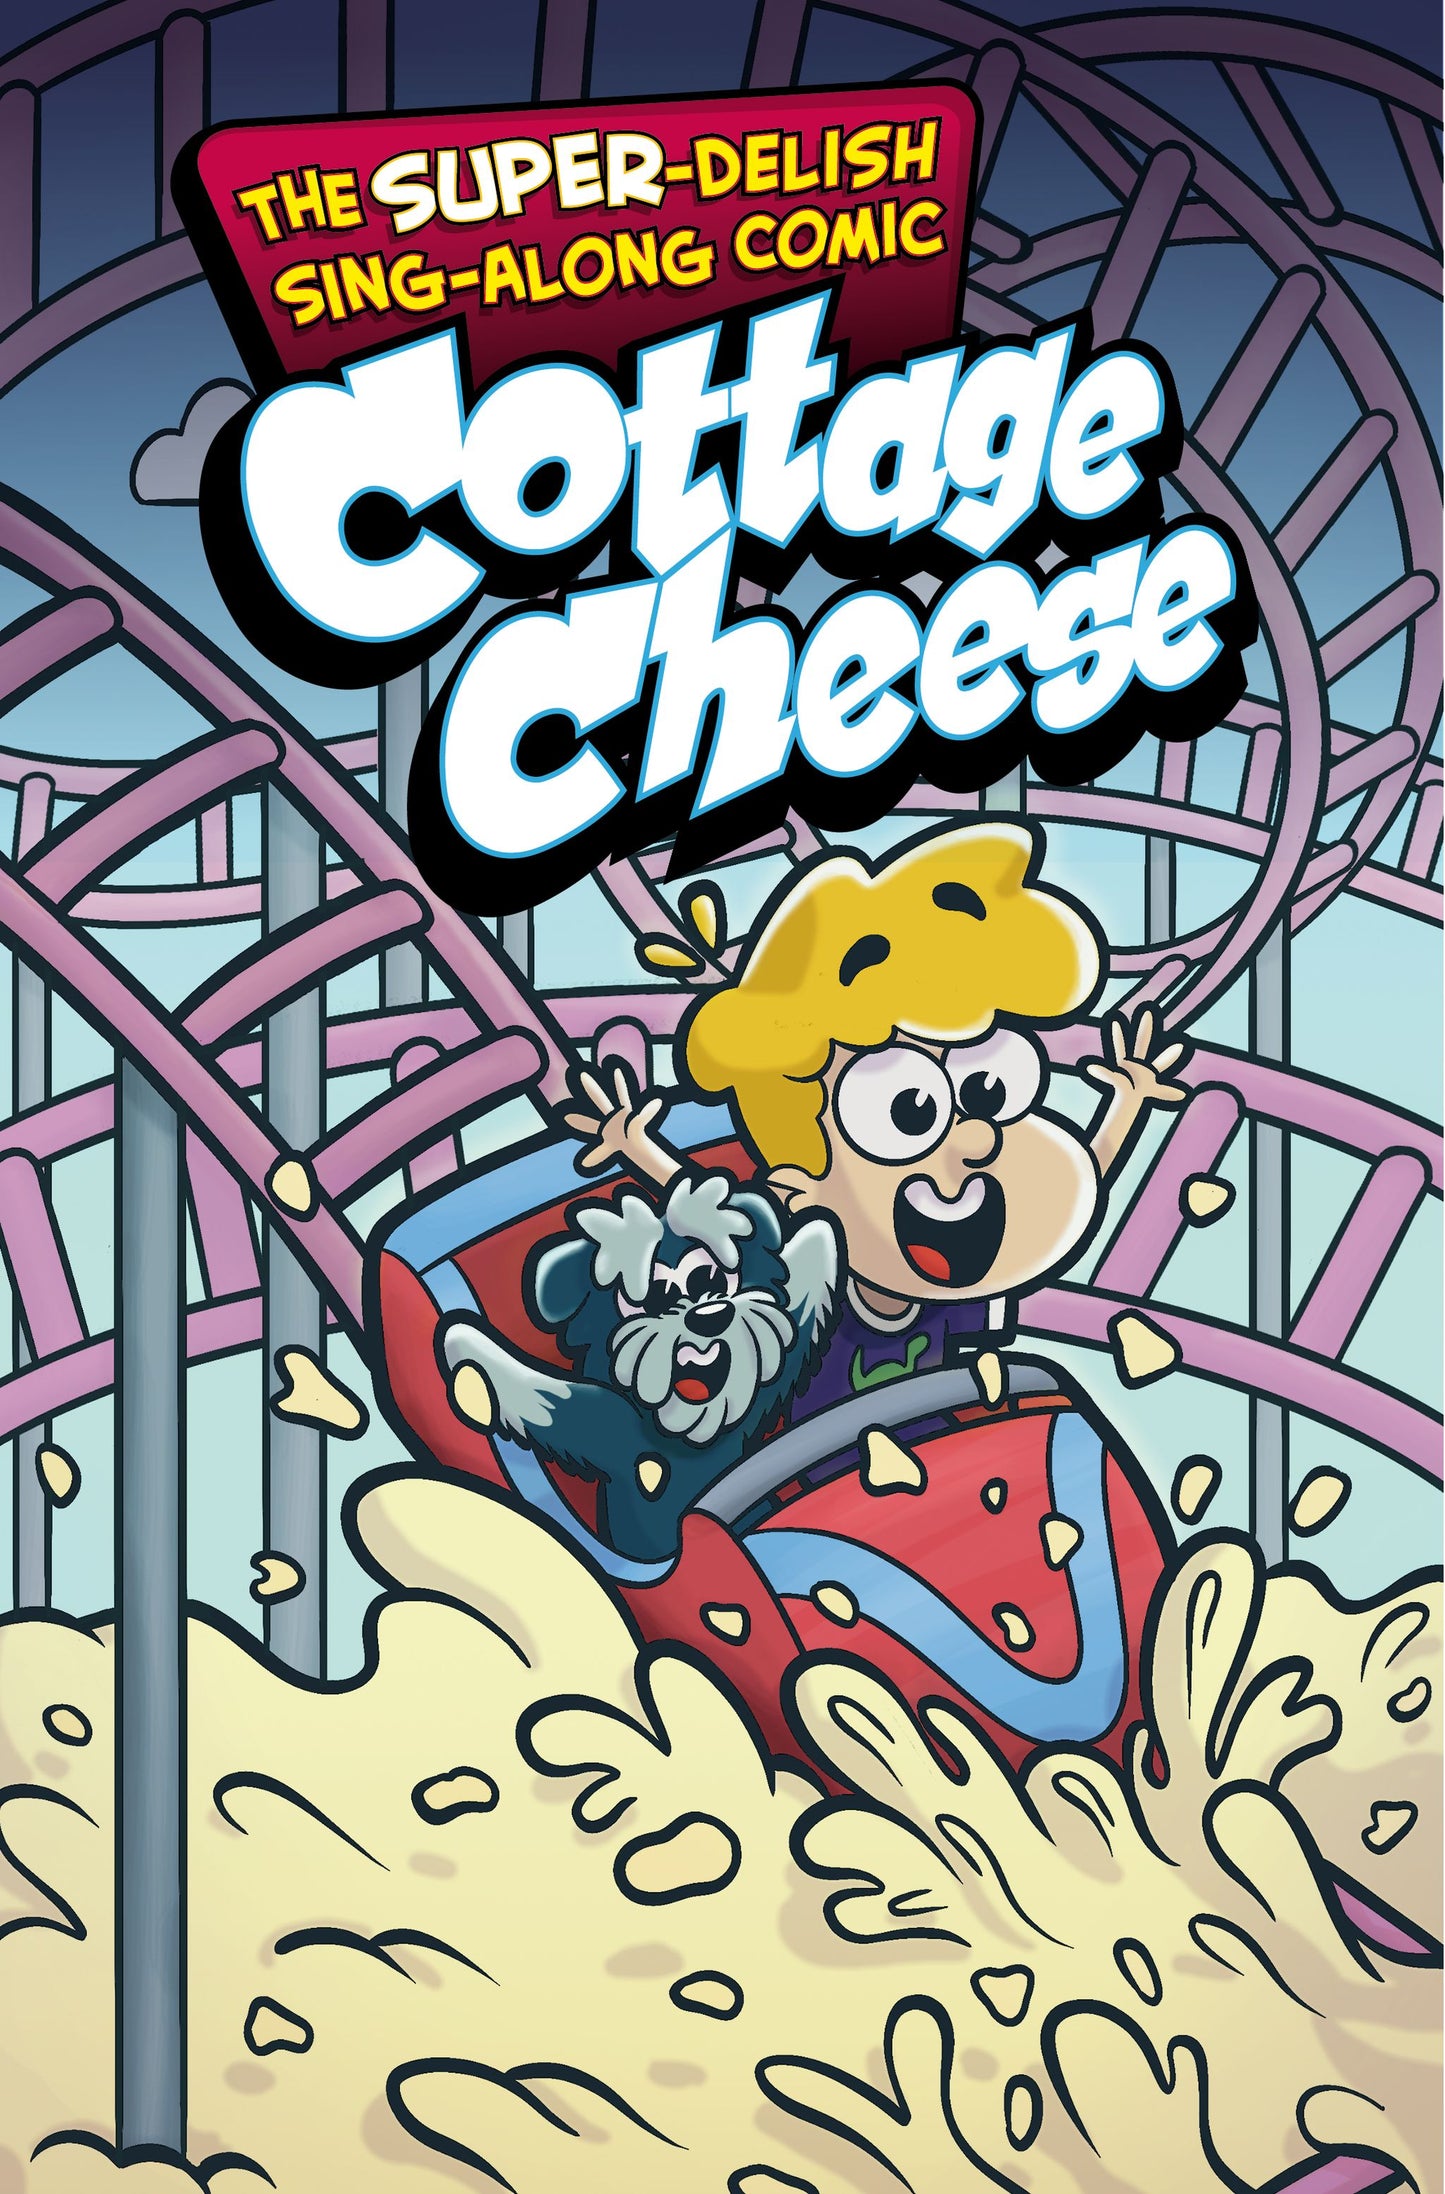 The Super-Delish Sing-Along Comic Book: Cottage Cheese - COVER A